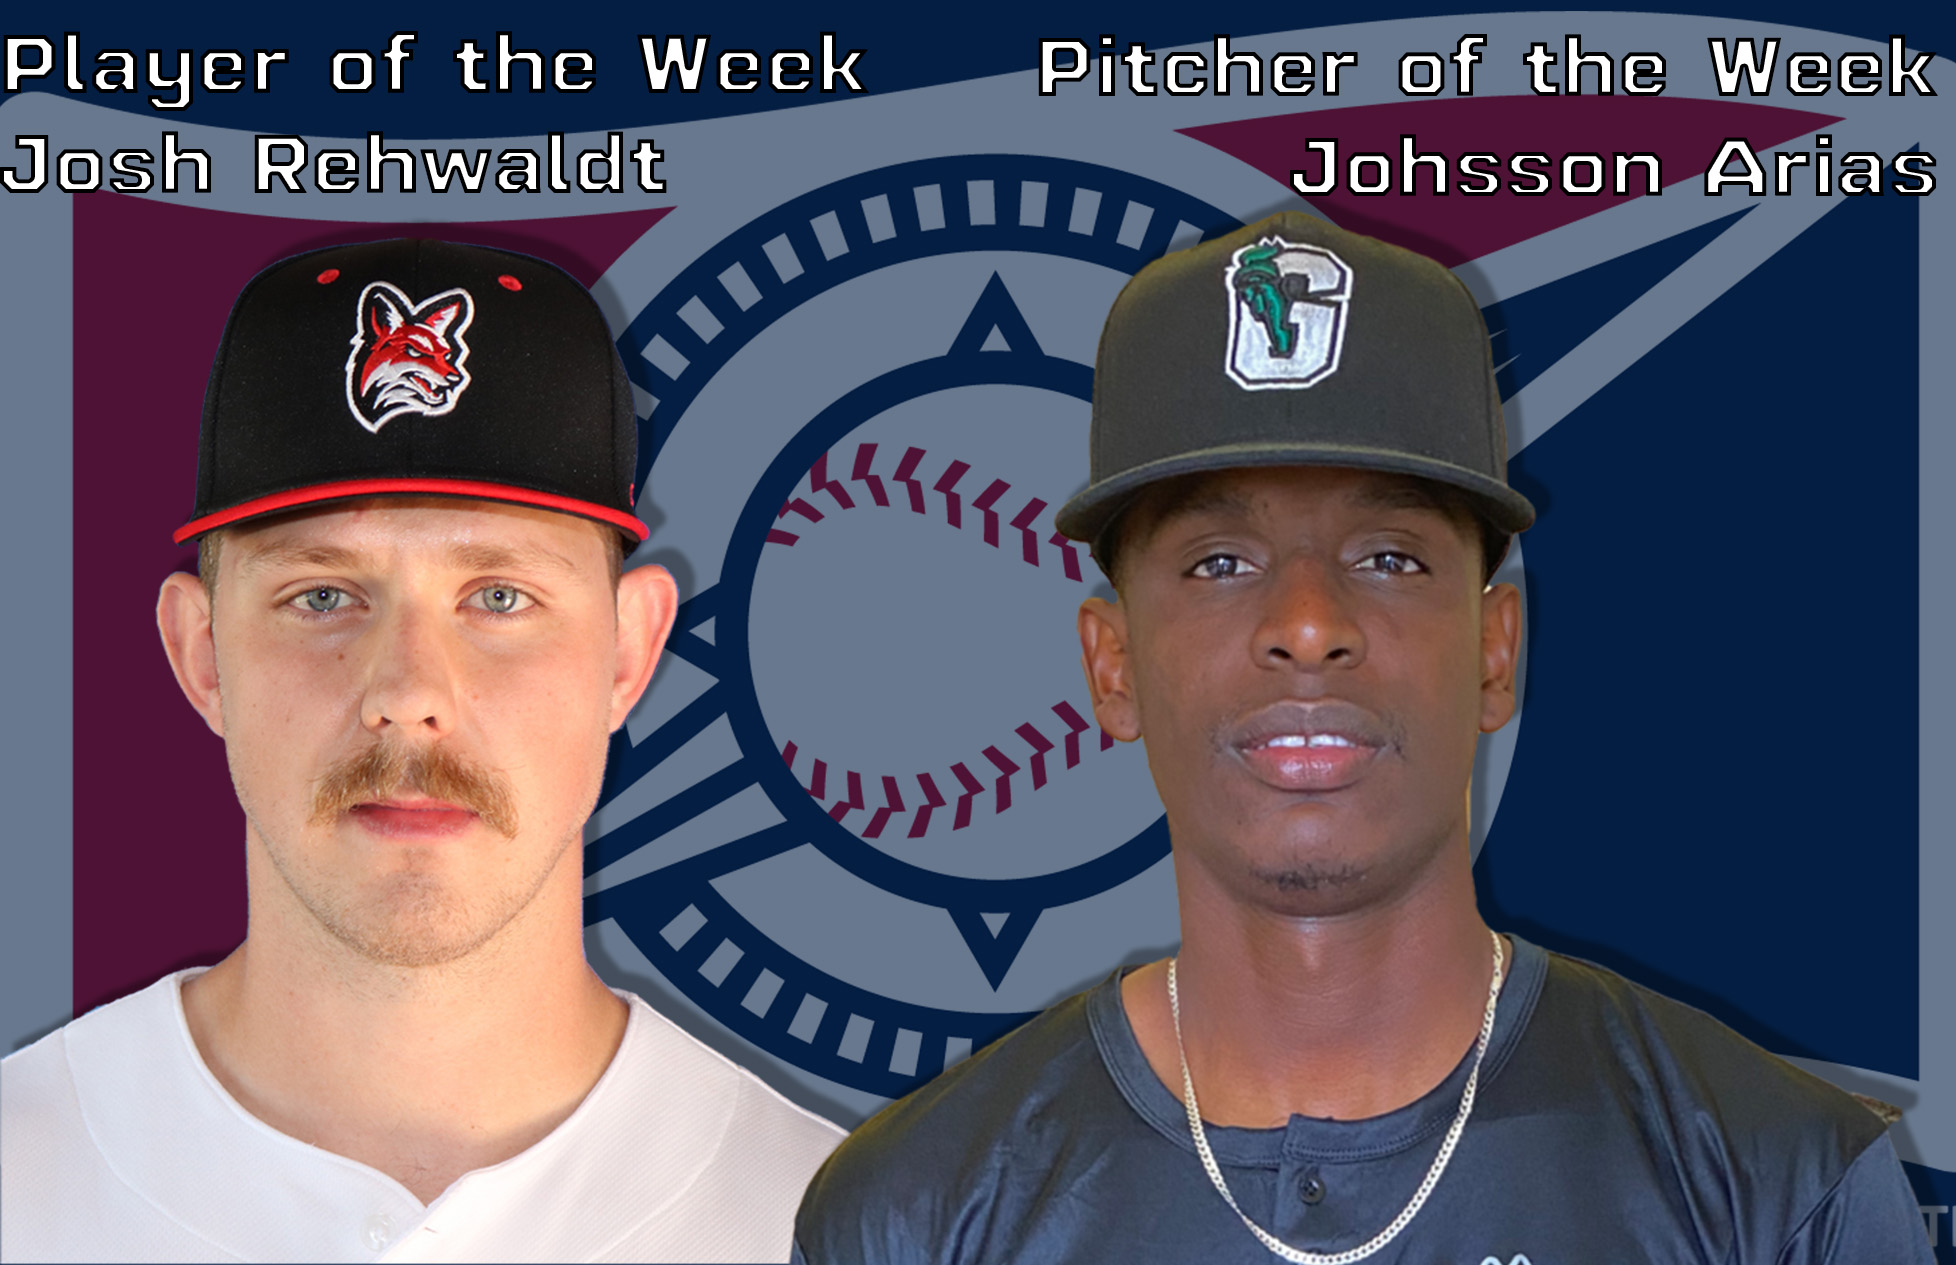 NEW JERSEY’S JOSH REHWALDT AND EMPIRE STATE’S JOHSSON ARIAS TAKE WEEKLY AWARDS